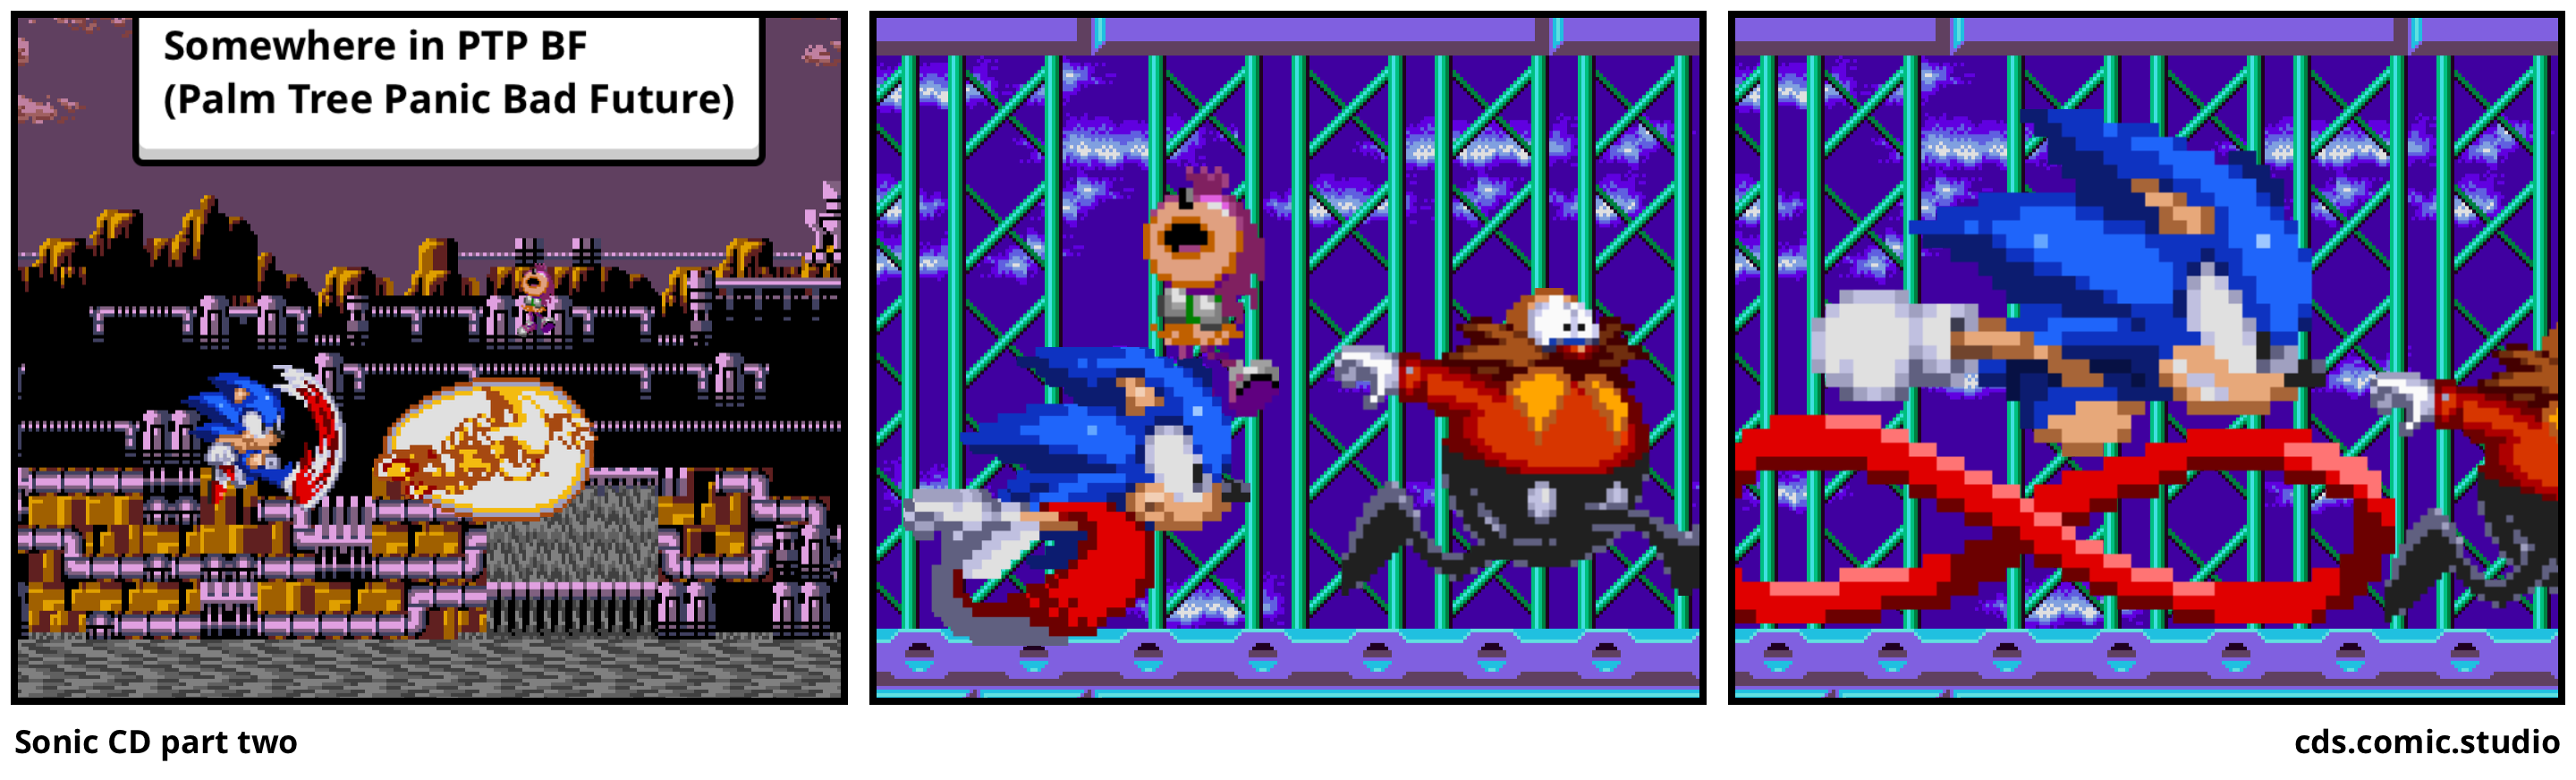 Sonic CD part two